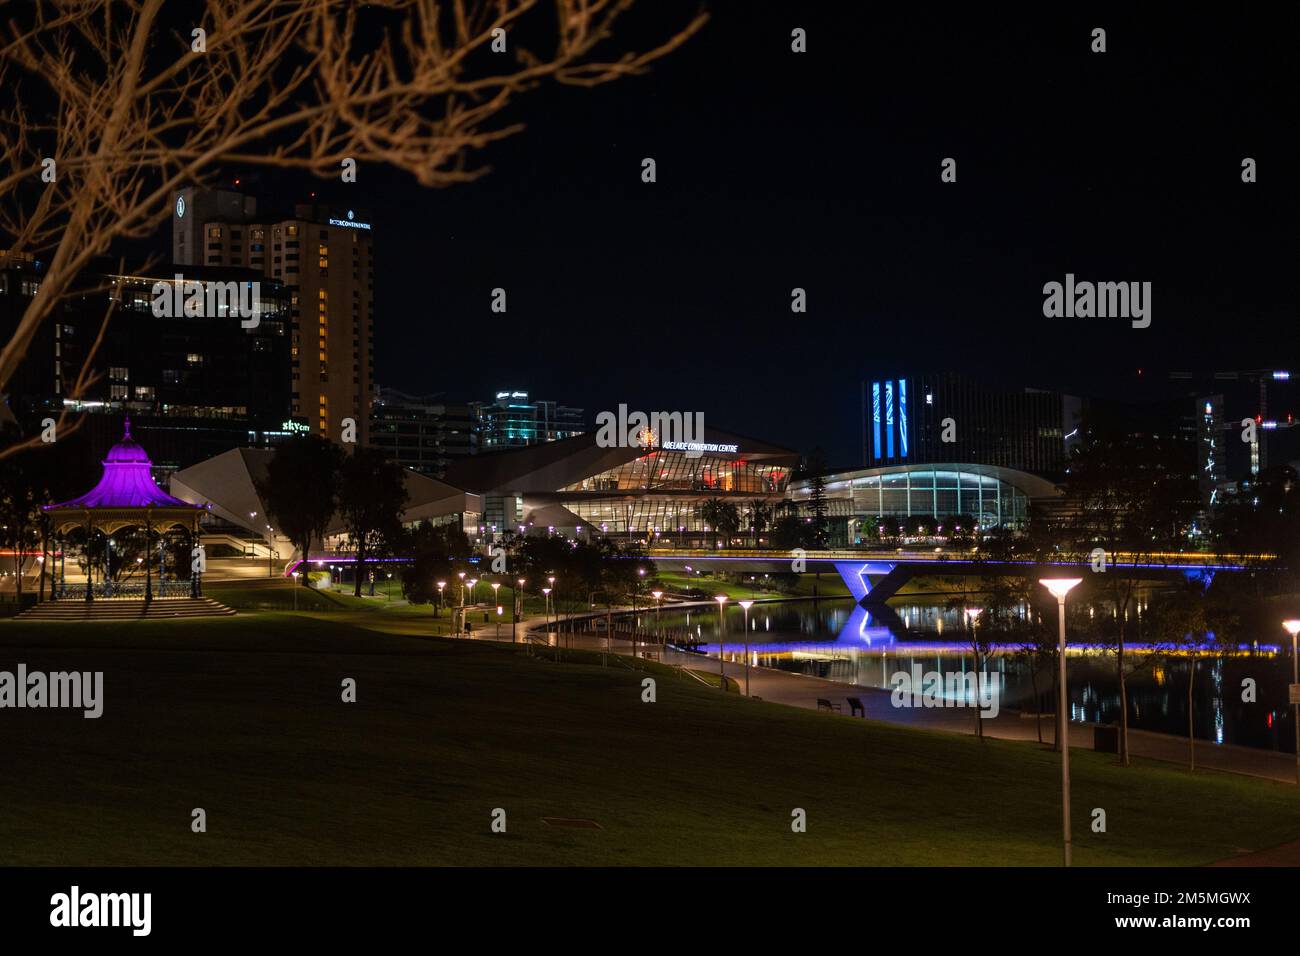 A night view of illuminated bridge and buildings by Torrens river in Adelaide city Stock Photo